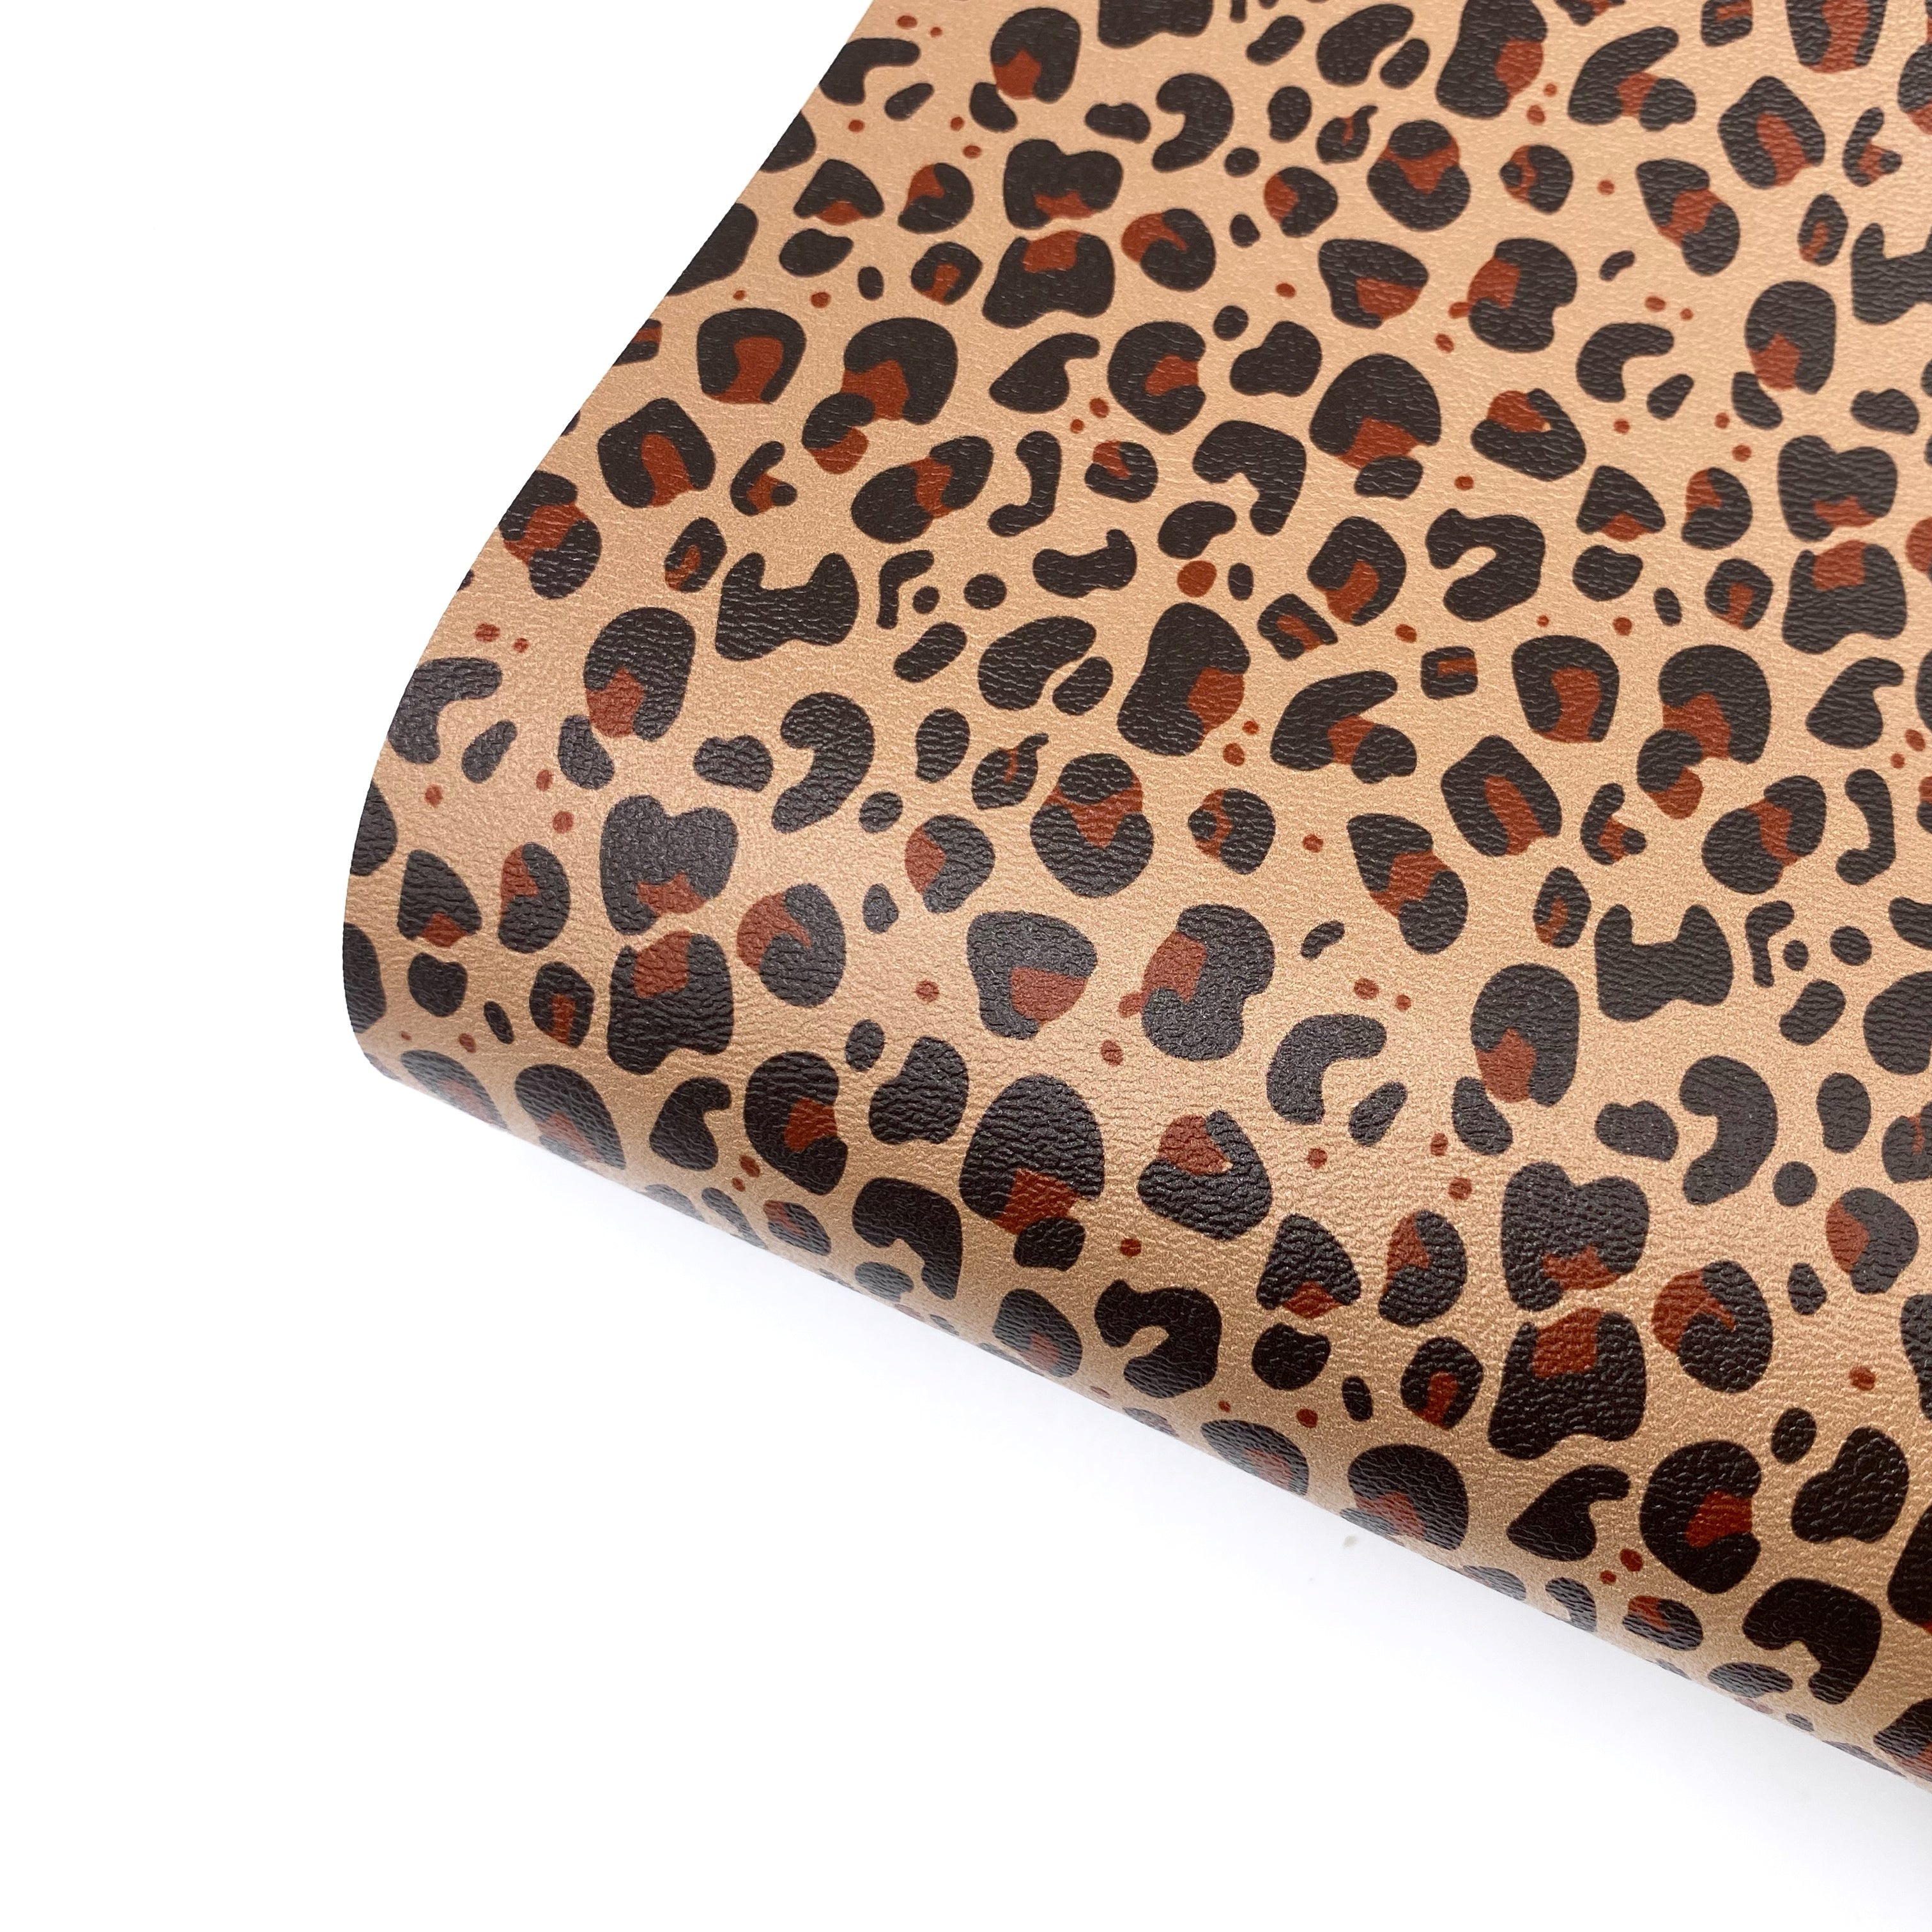 Classic Brown Leopard Print Premium Faux Leather Fabric Sheets